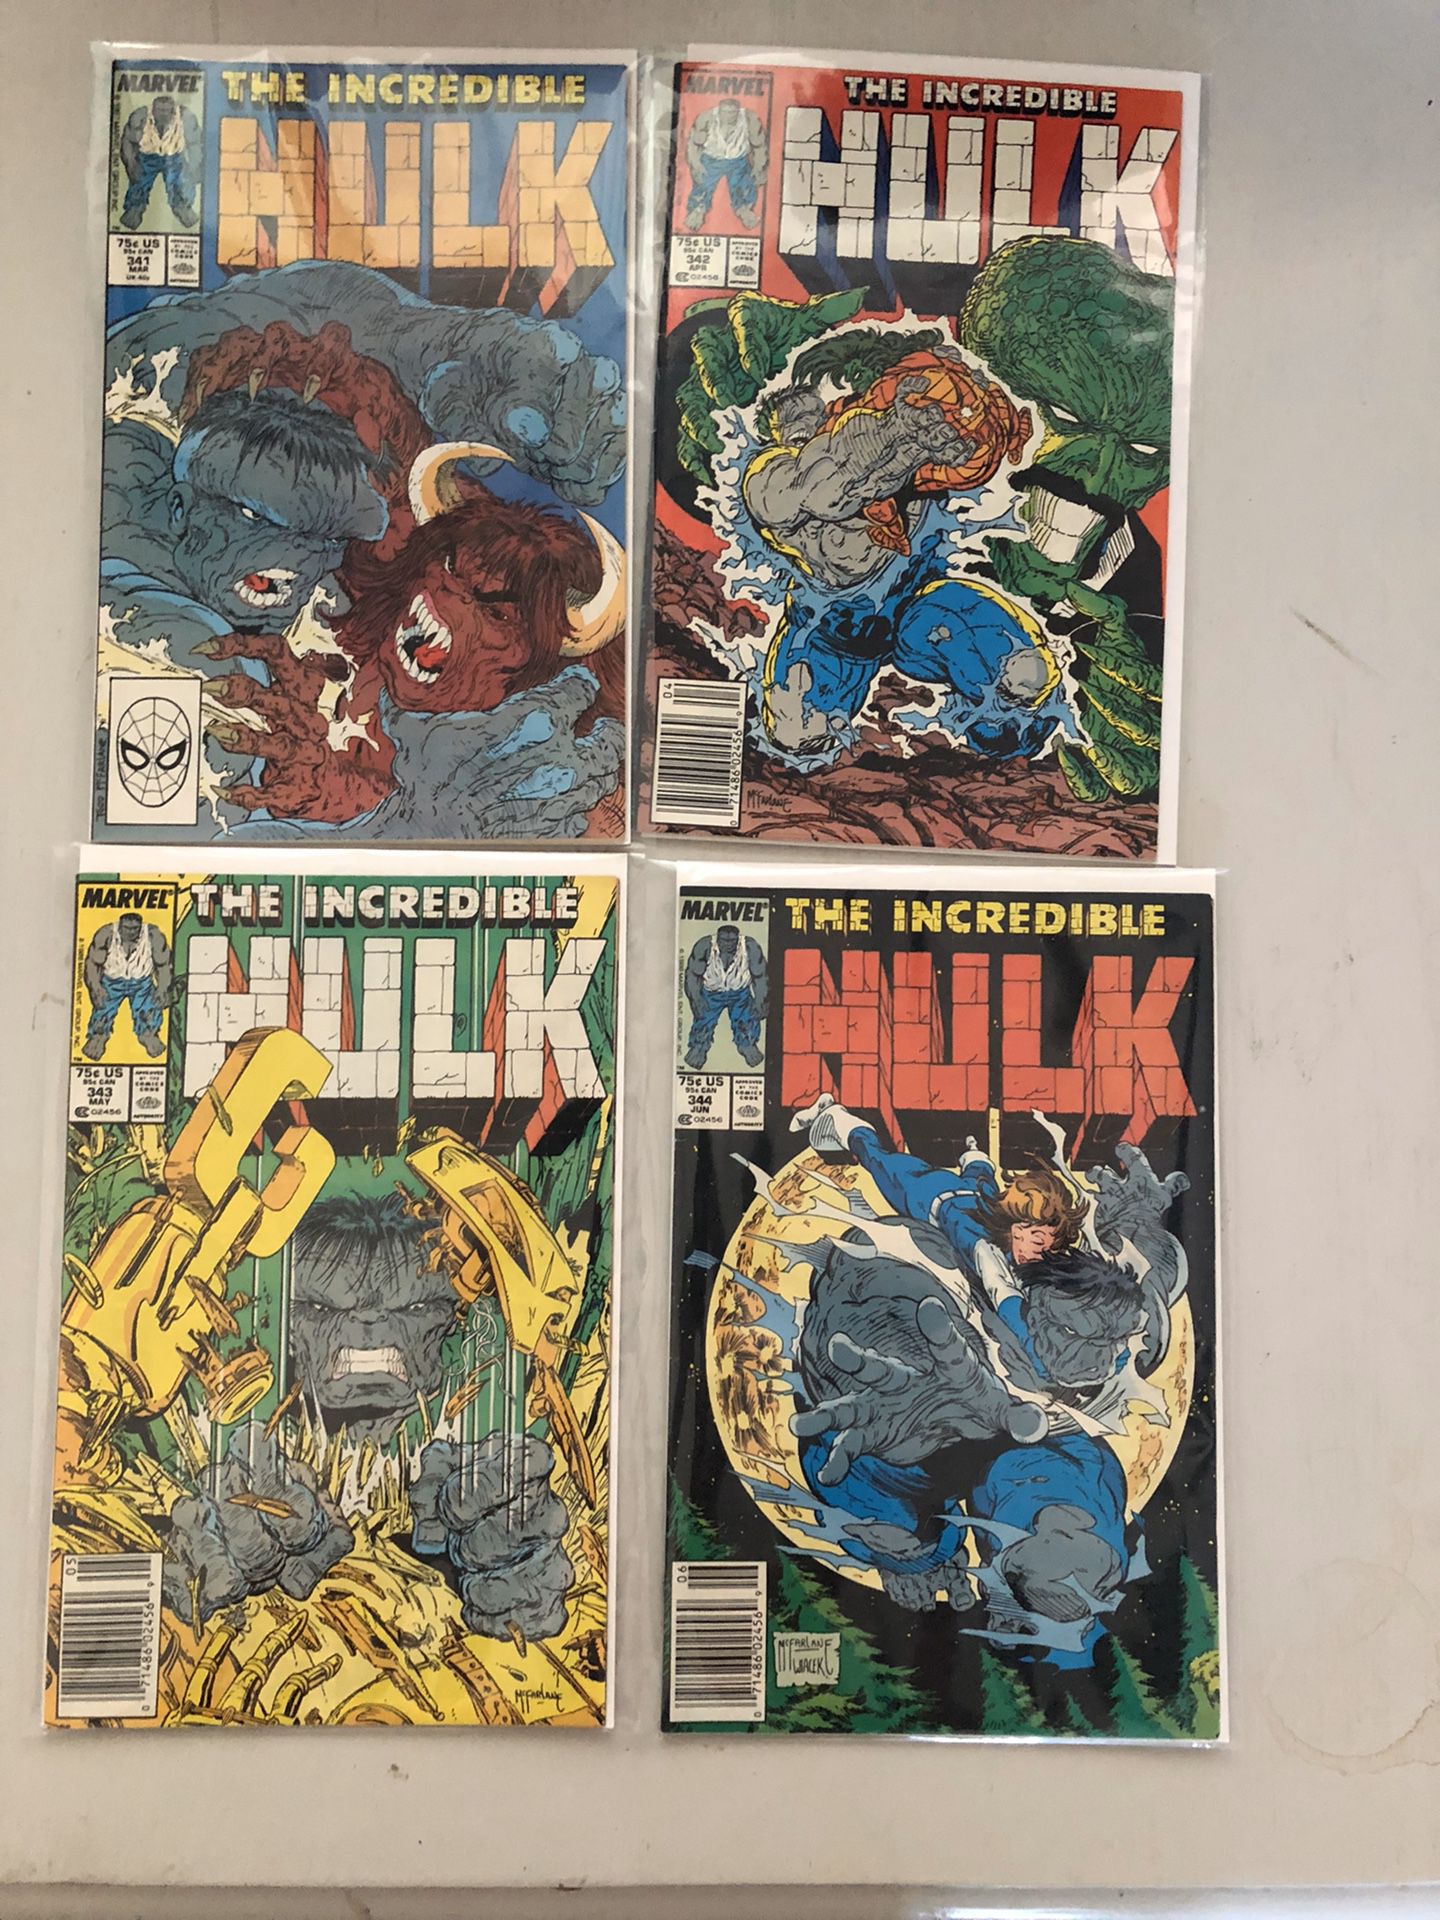 4 Issues From the Incredible Hulk Series: #341, #342, #343, #344!